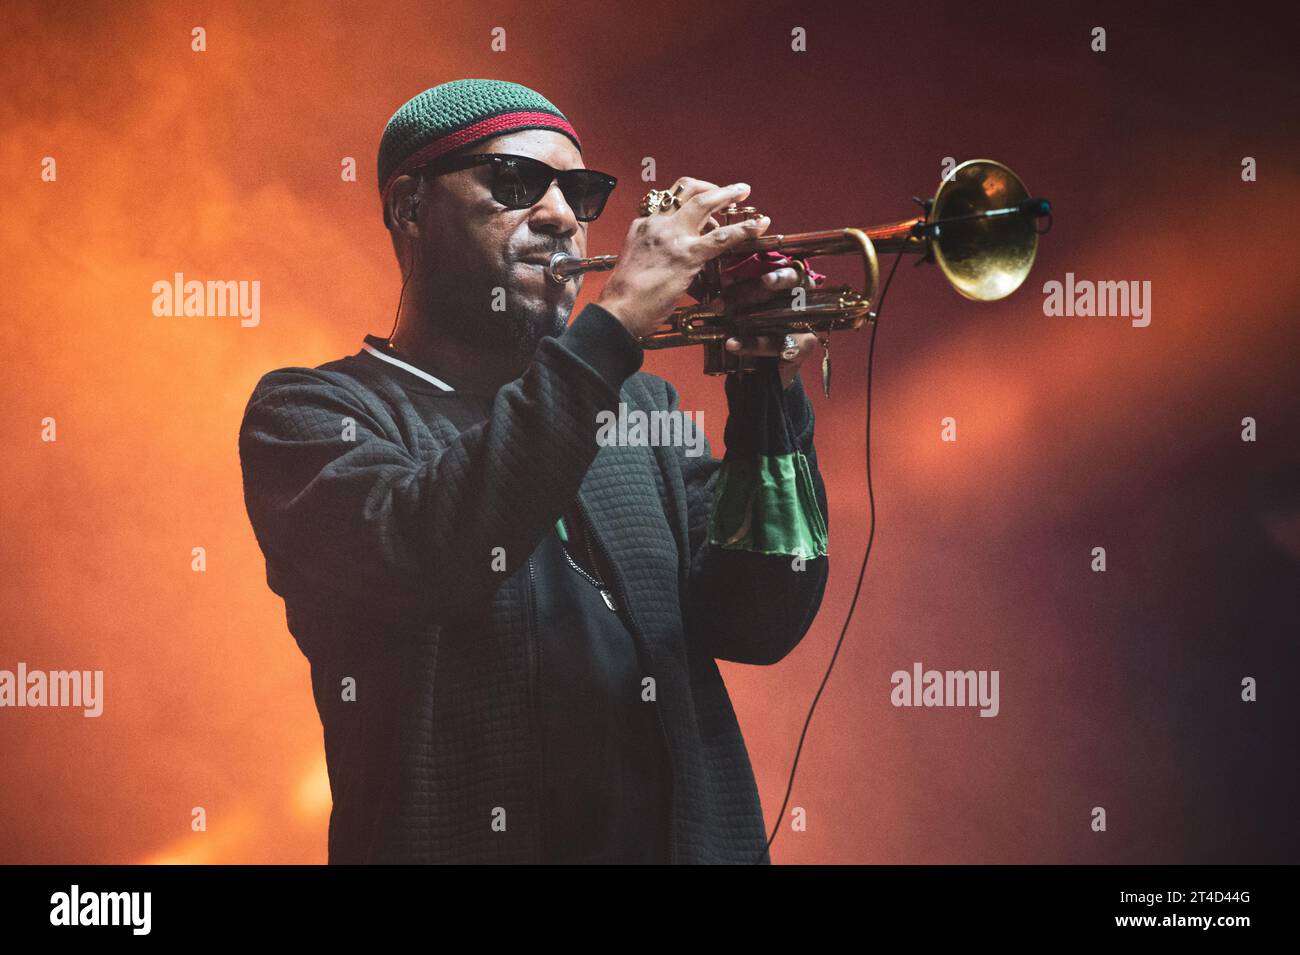 ITALY, TURIN, OCTOBER 29TH: The trumpeter Russell Gunn performing live on stage in Turin, during the American jazz/fusion bassist Marcus Miller European tour 2023. Stock Photo